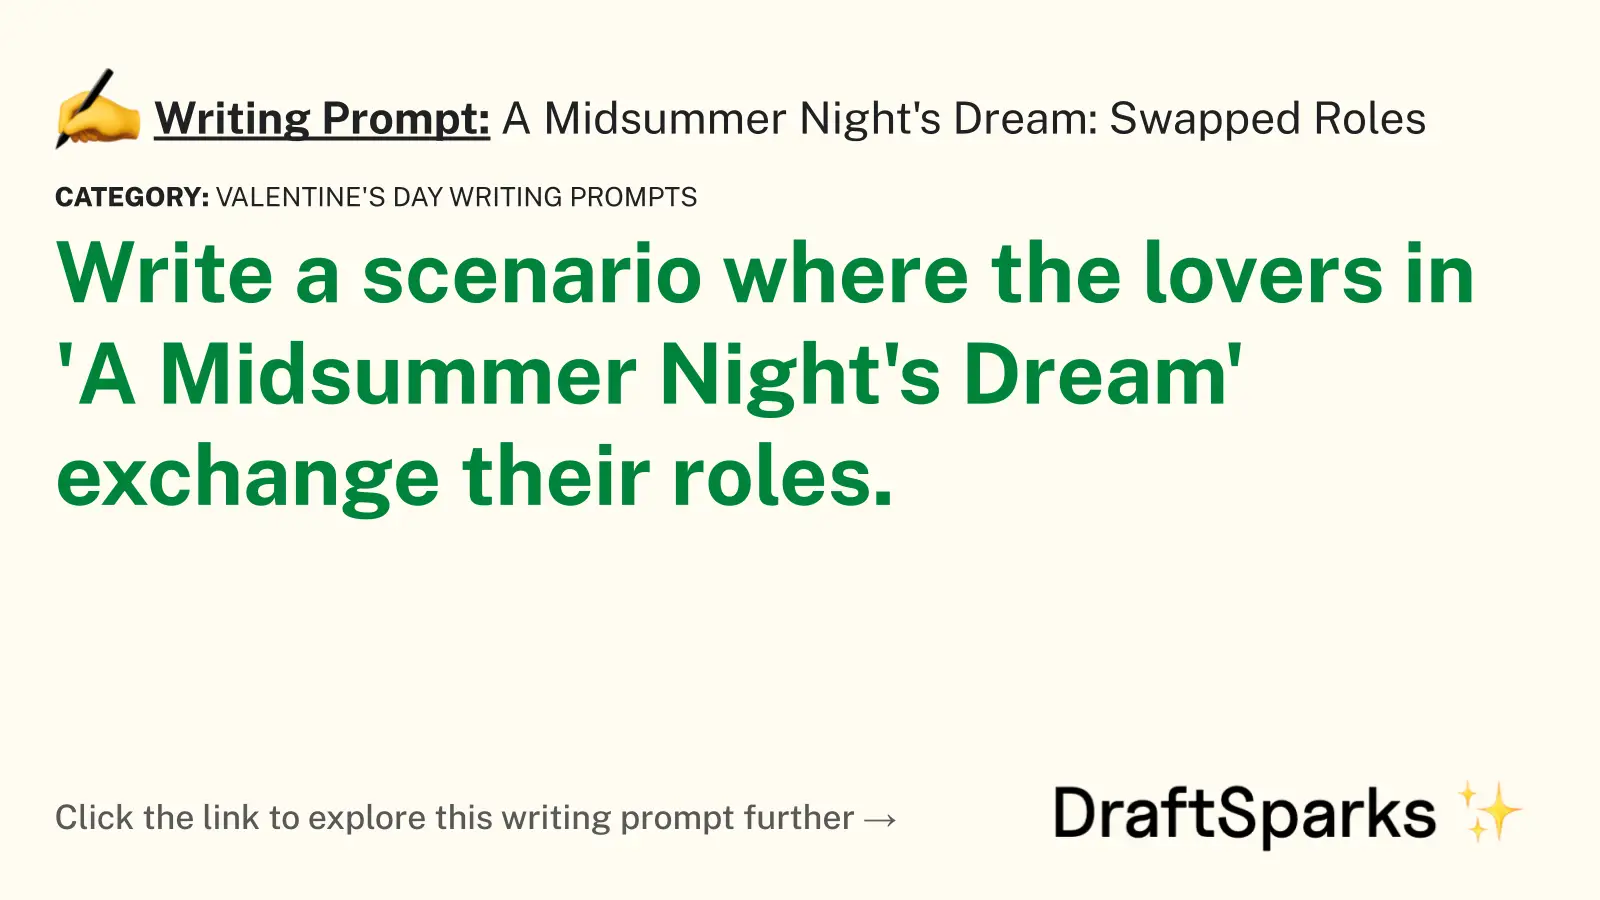 A Midsummer Night’s Dream: Swapped Roles